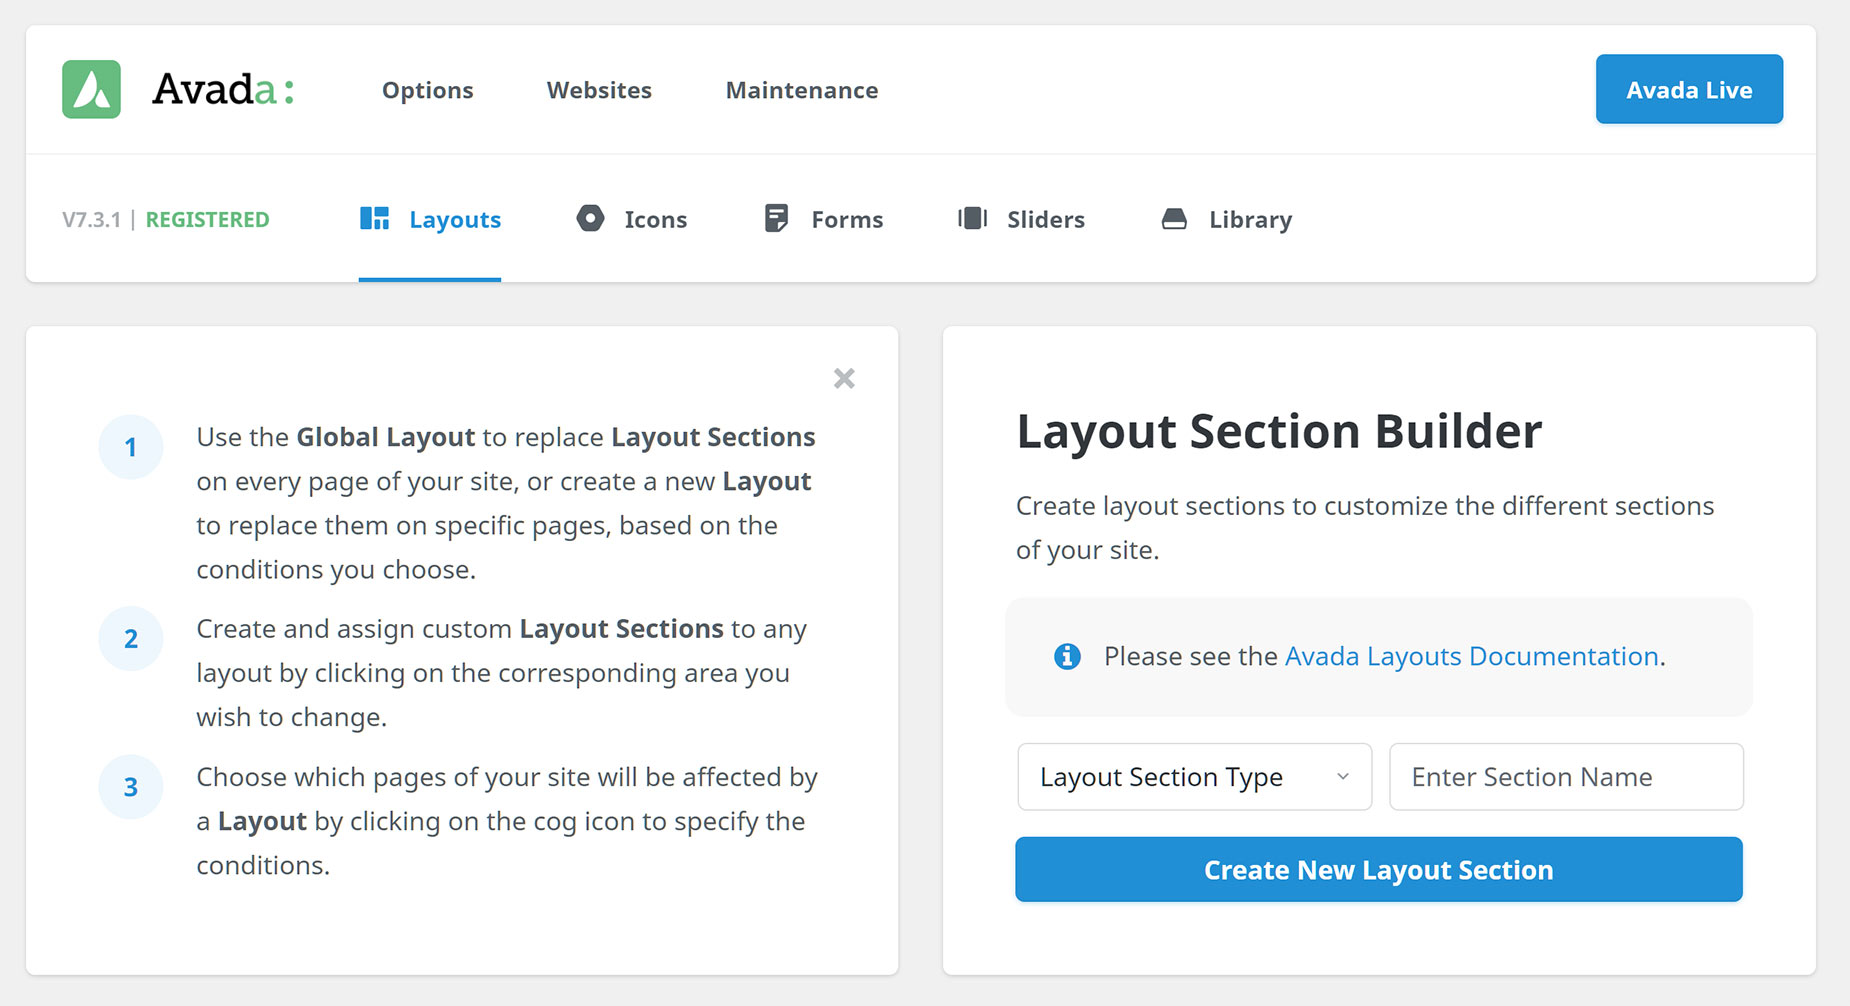 Layout Section Builder